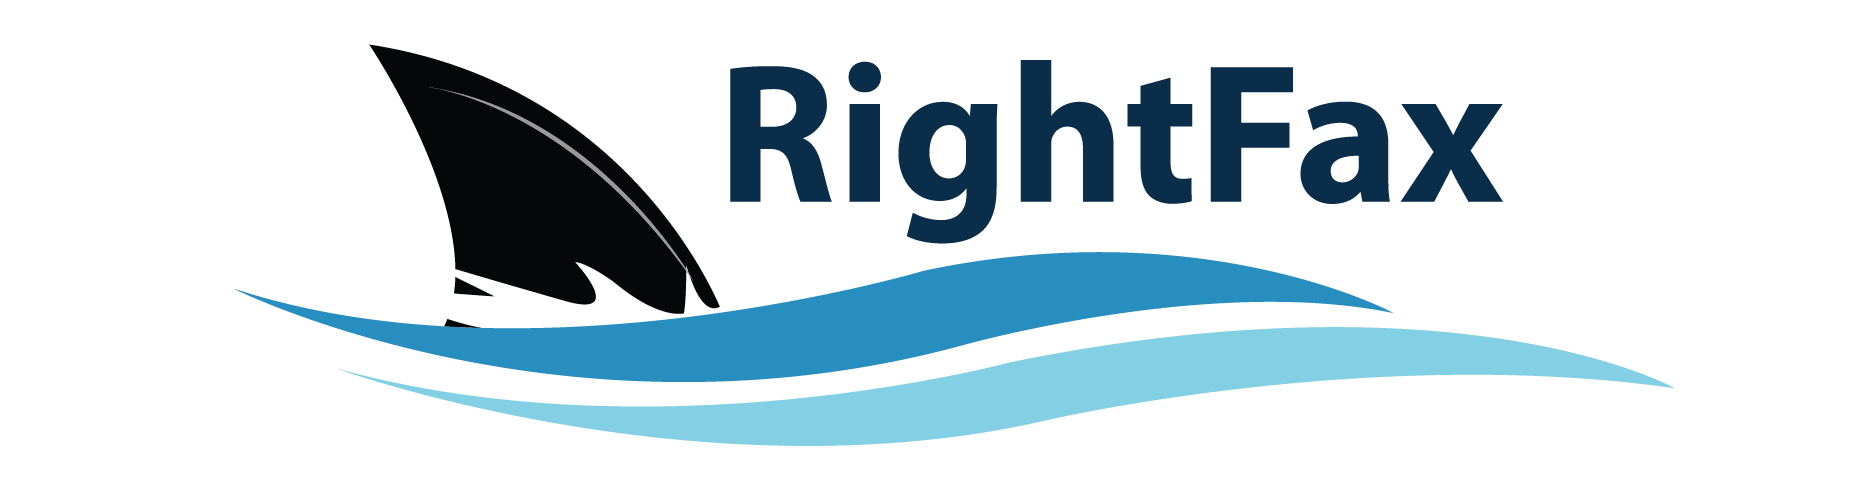 RightFax Logo - RightFax Selling Point: Ease of Use